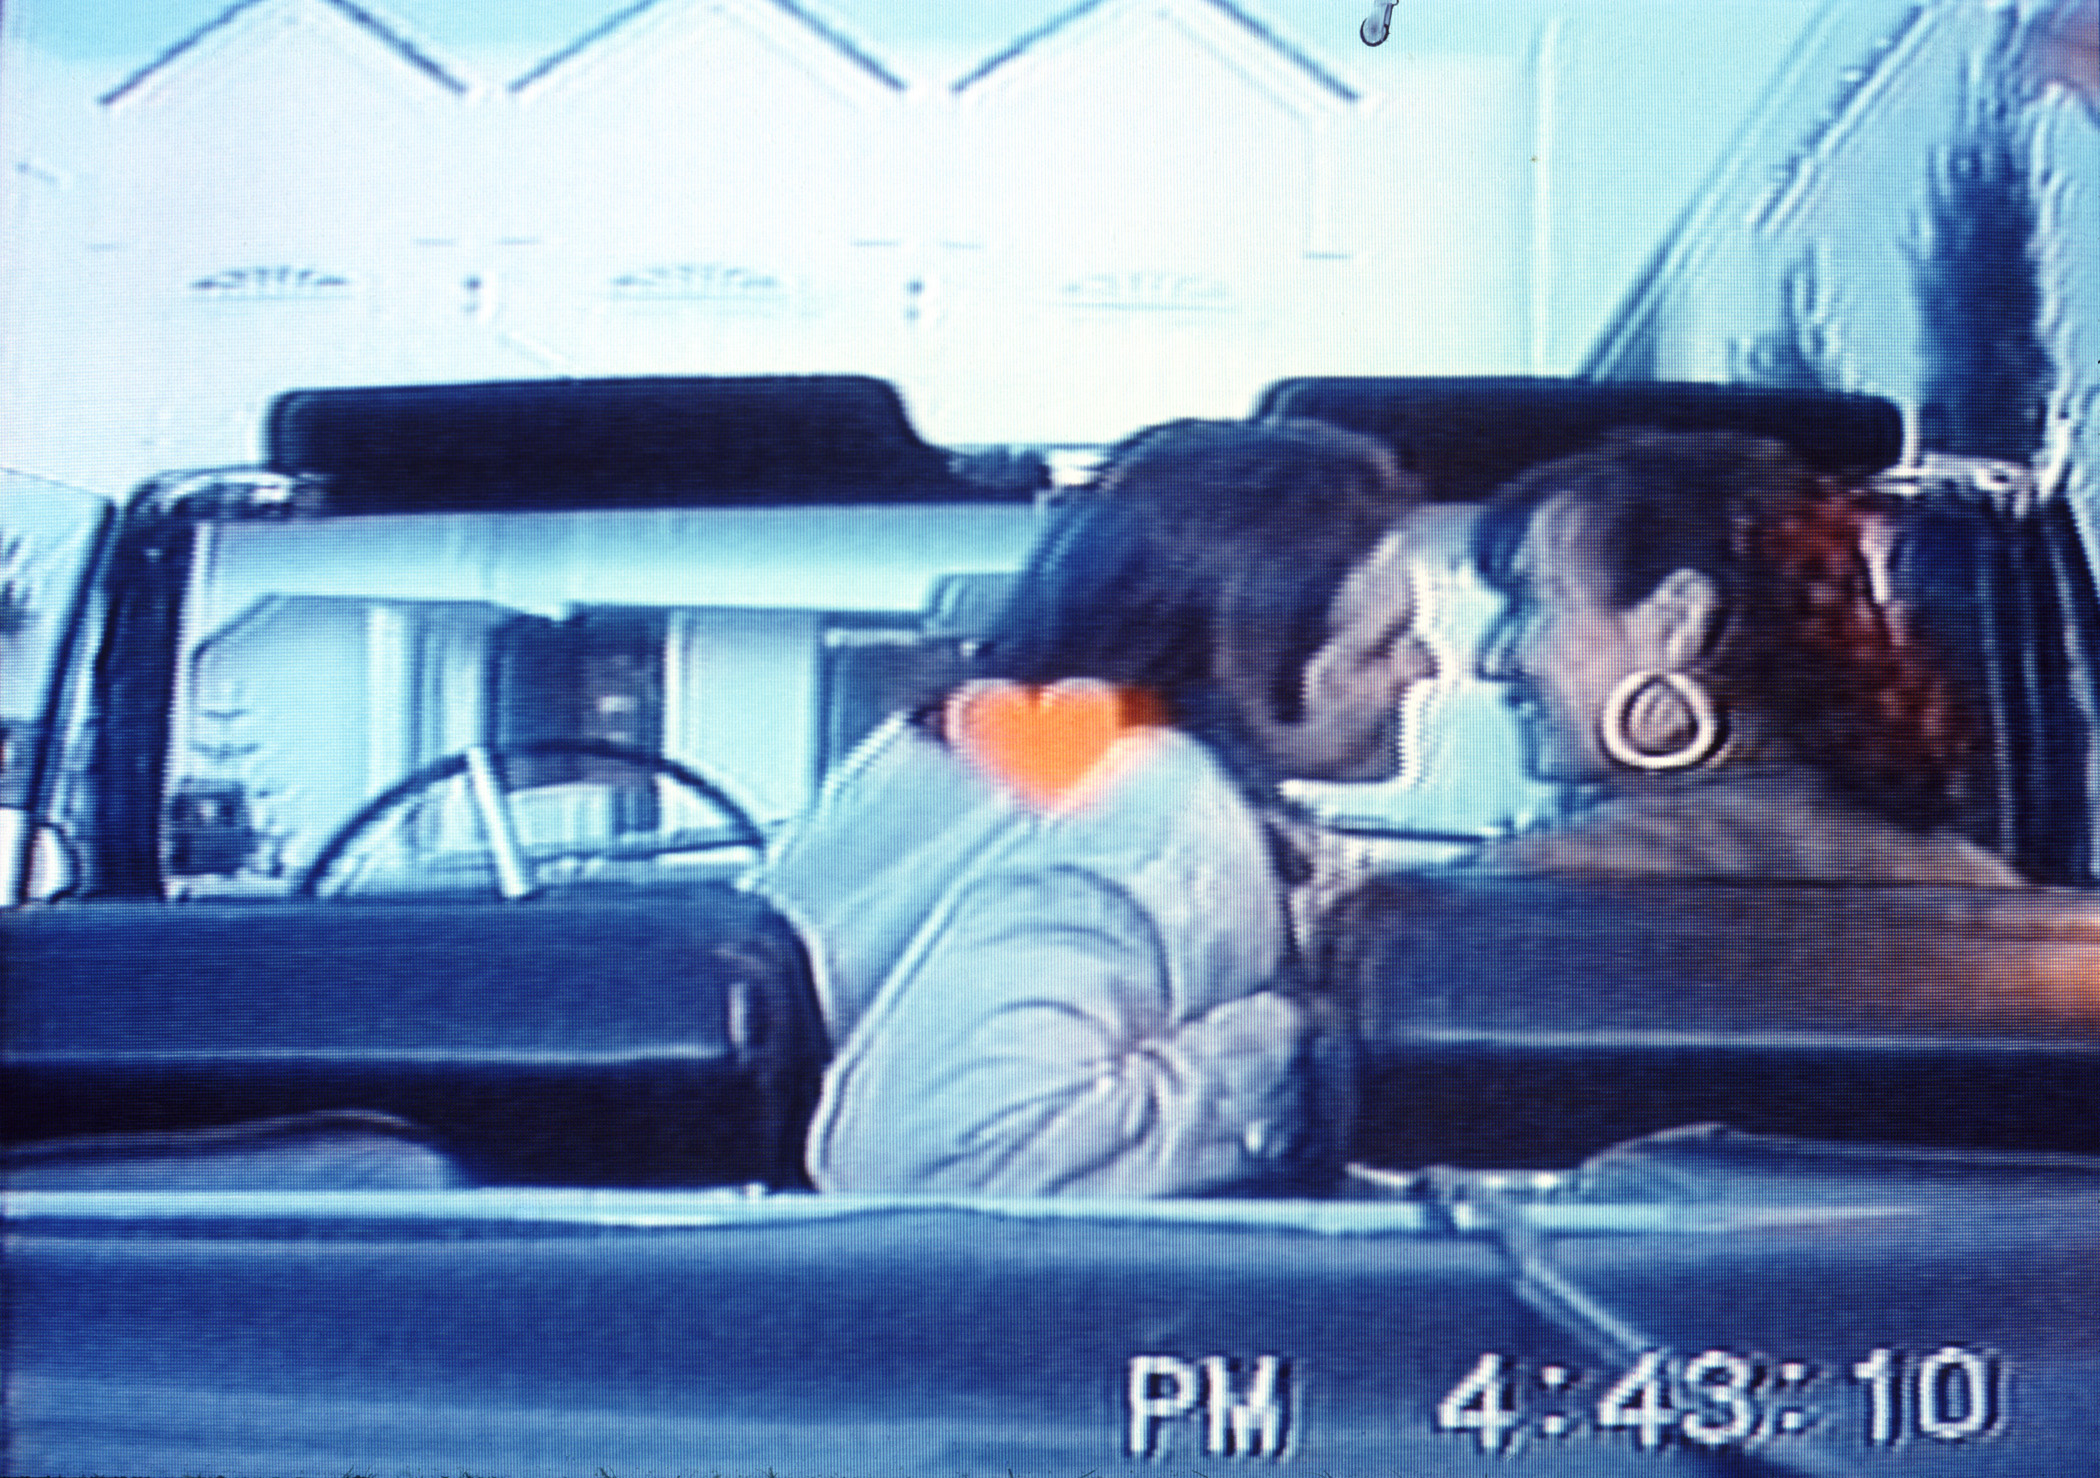 Grainy video still of a man and a woman seen from behind, seated in the front seat of a convertible, with the man leaning over to give the woman a kiss. A small orange heart floats in the center of the image. A time stamp reads PM 4:43:10.